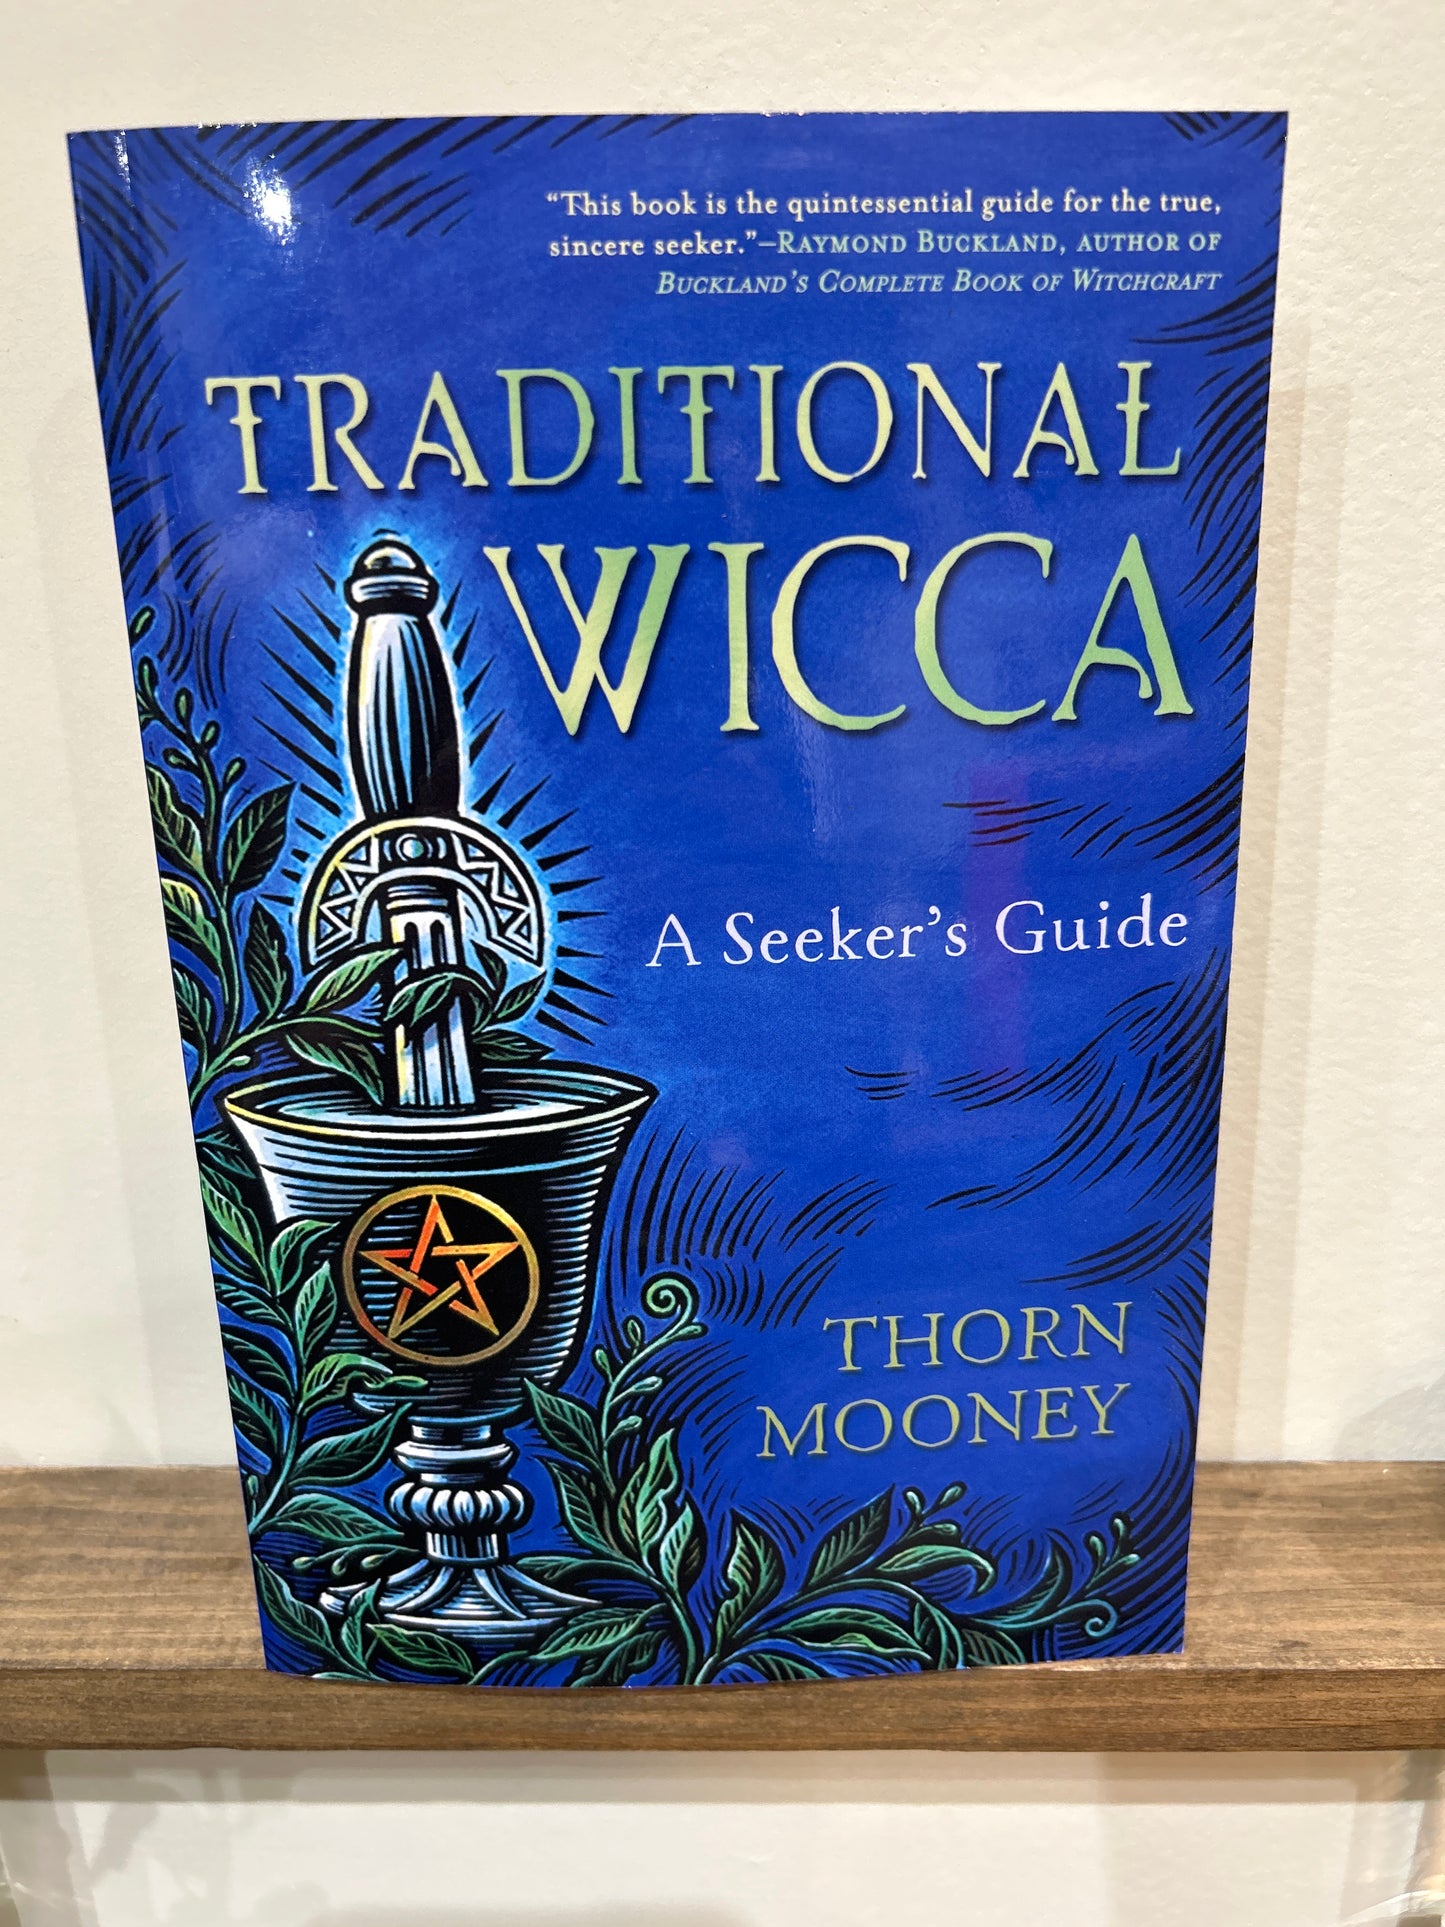 Traditional Wicca by Thorn Mooney